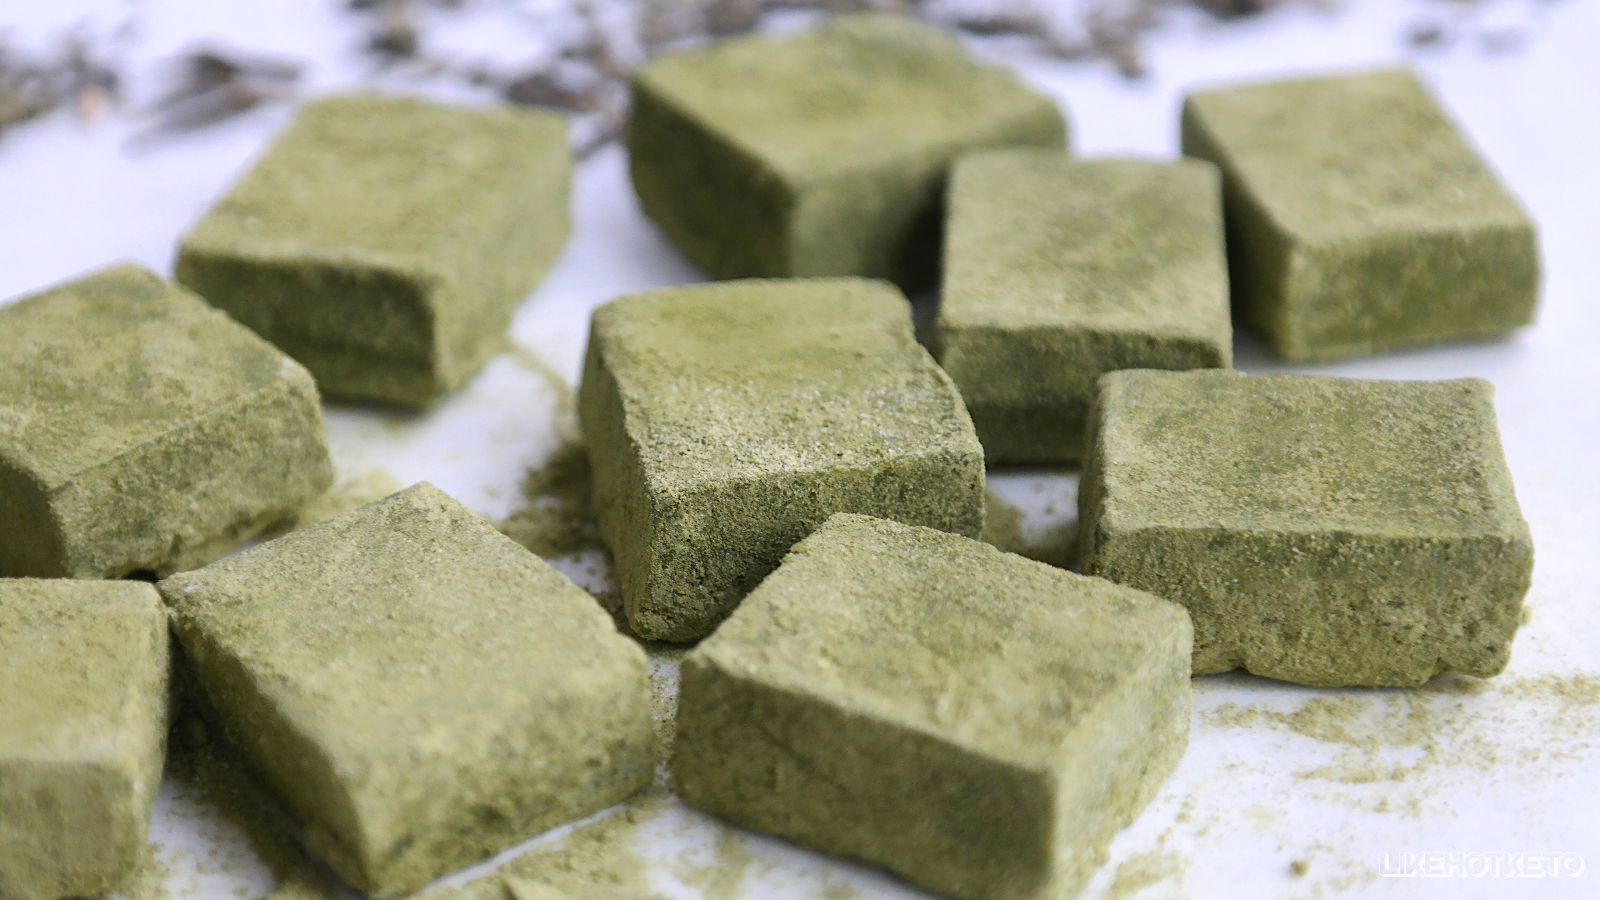 Squares of matcha sugar-free chocolate and a few green tea leaves.